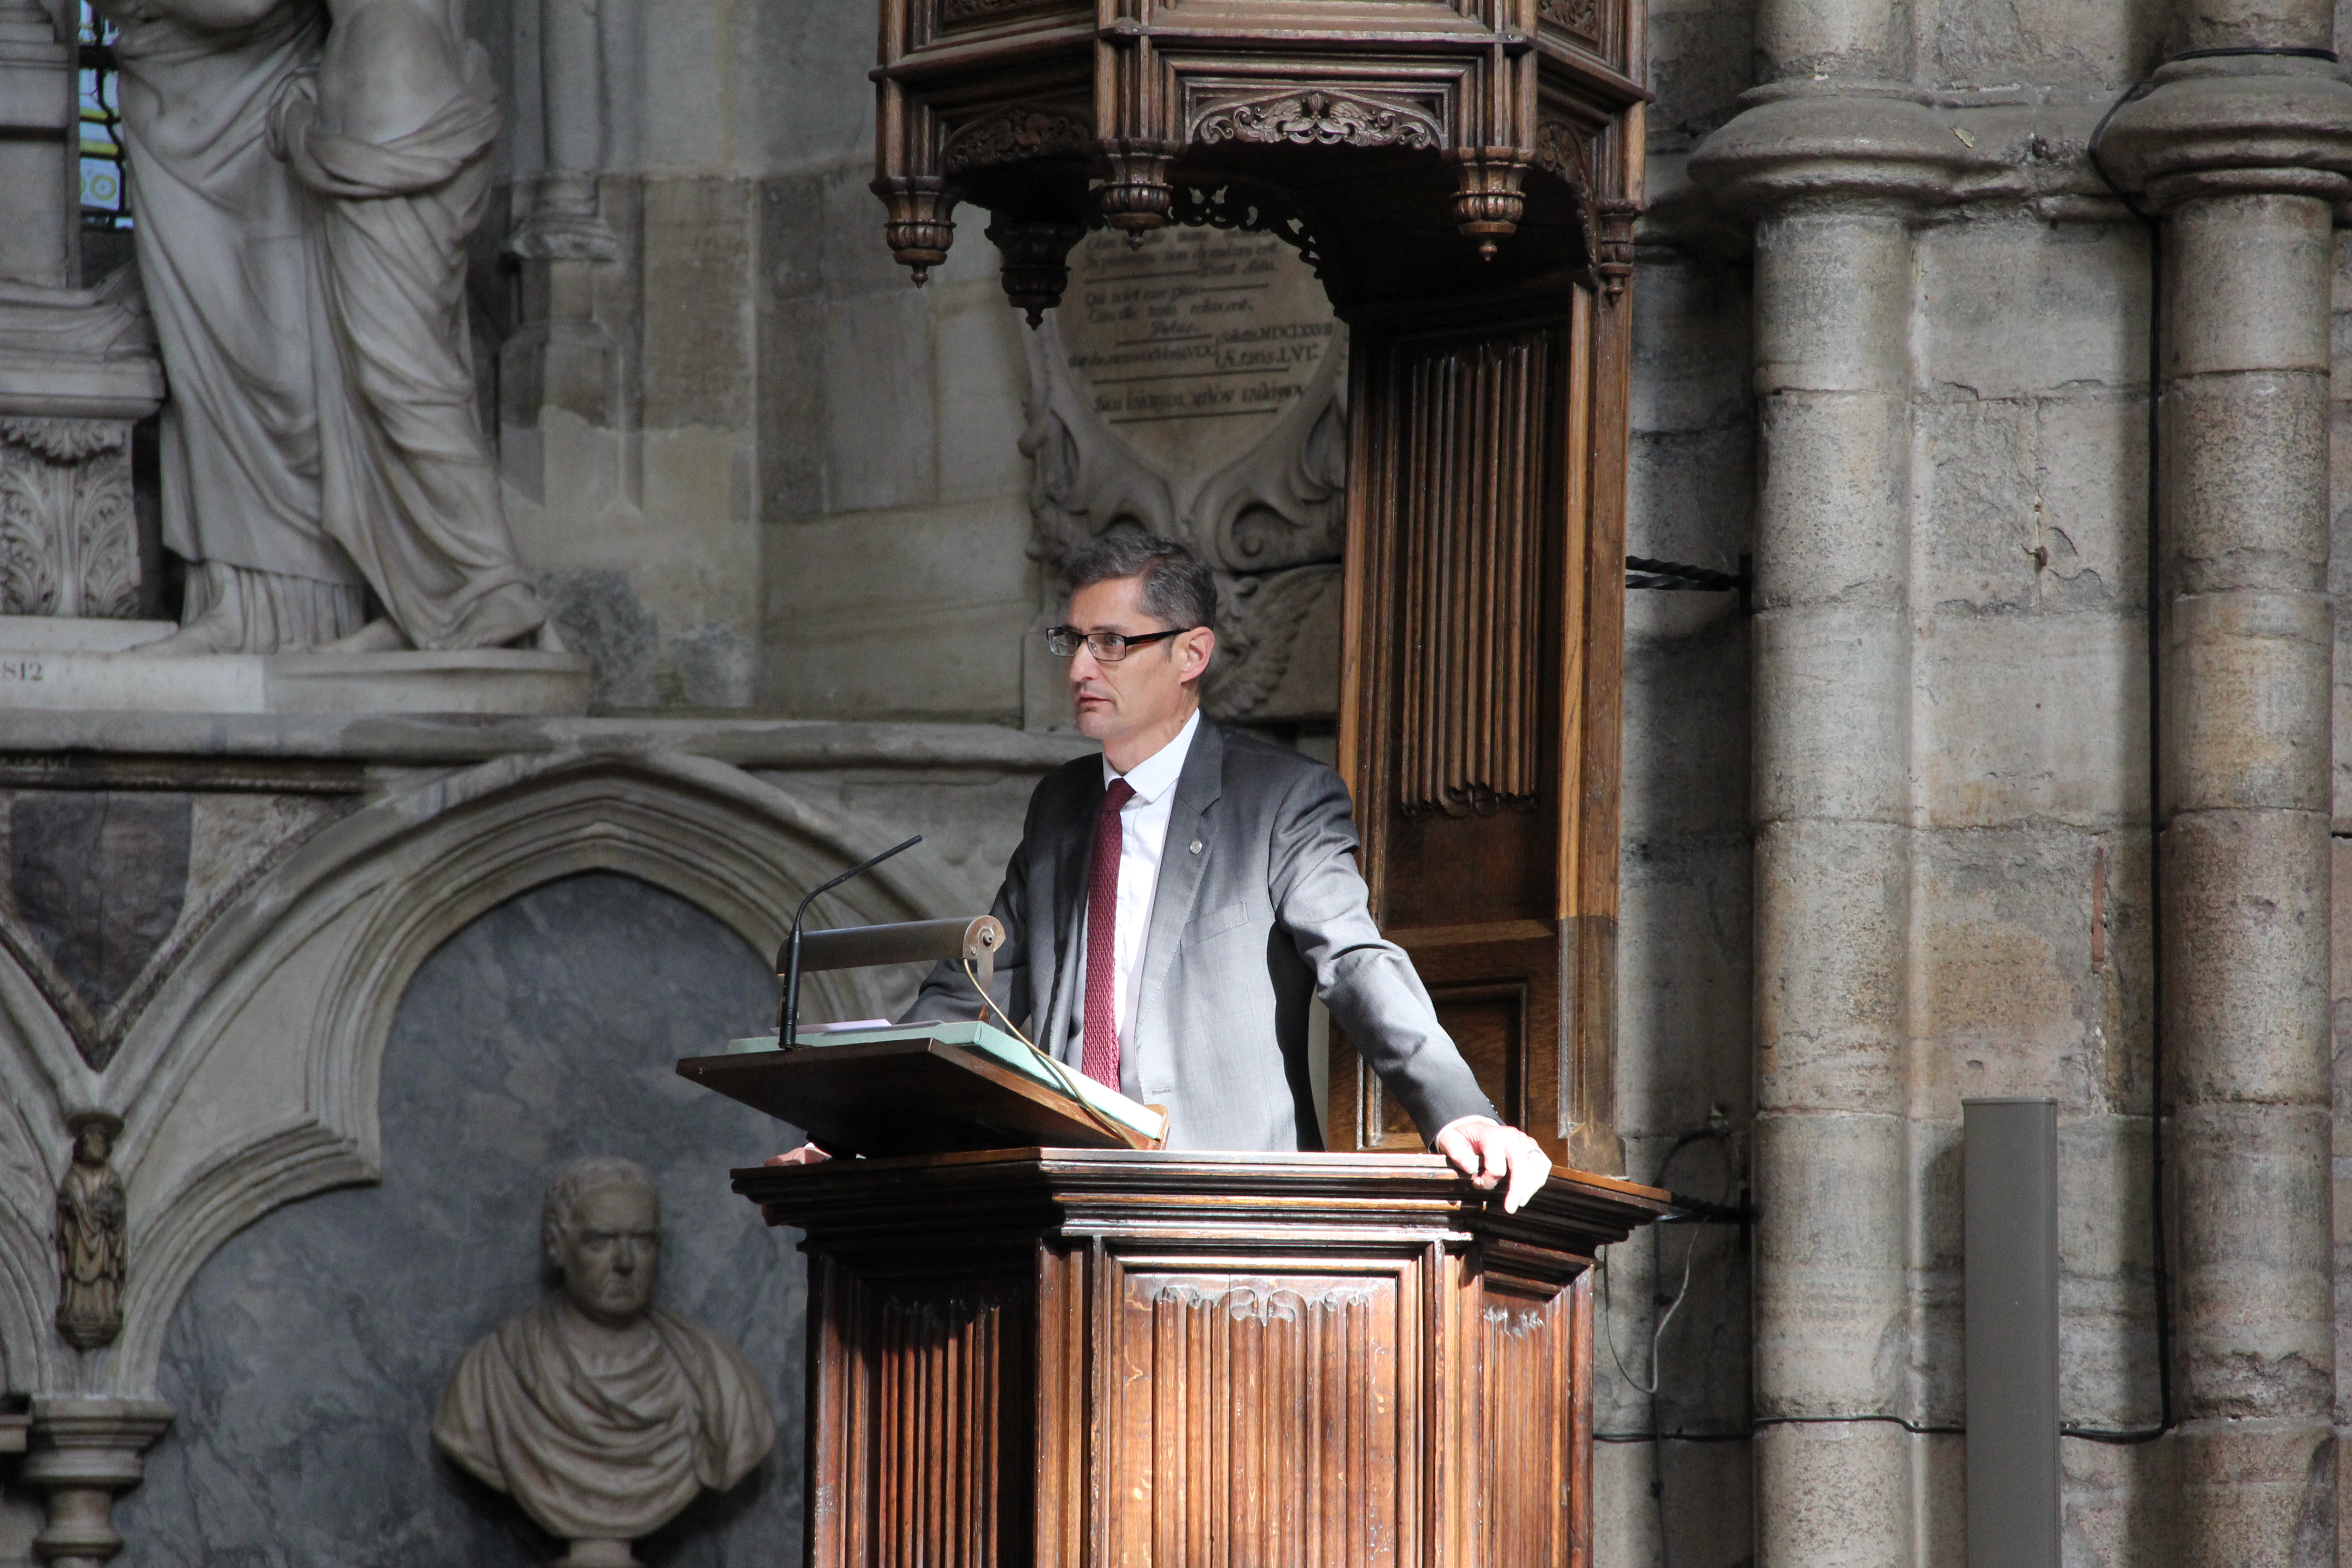 John Everitt, Chief Executive of the National Forest Company, gives a reading at Westminster Abbey